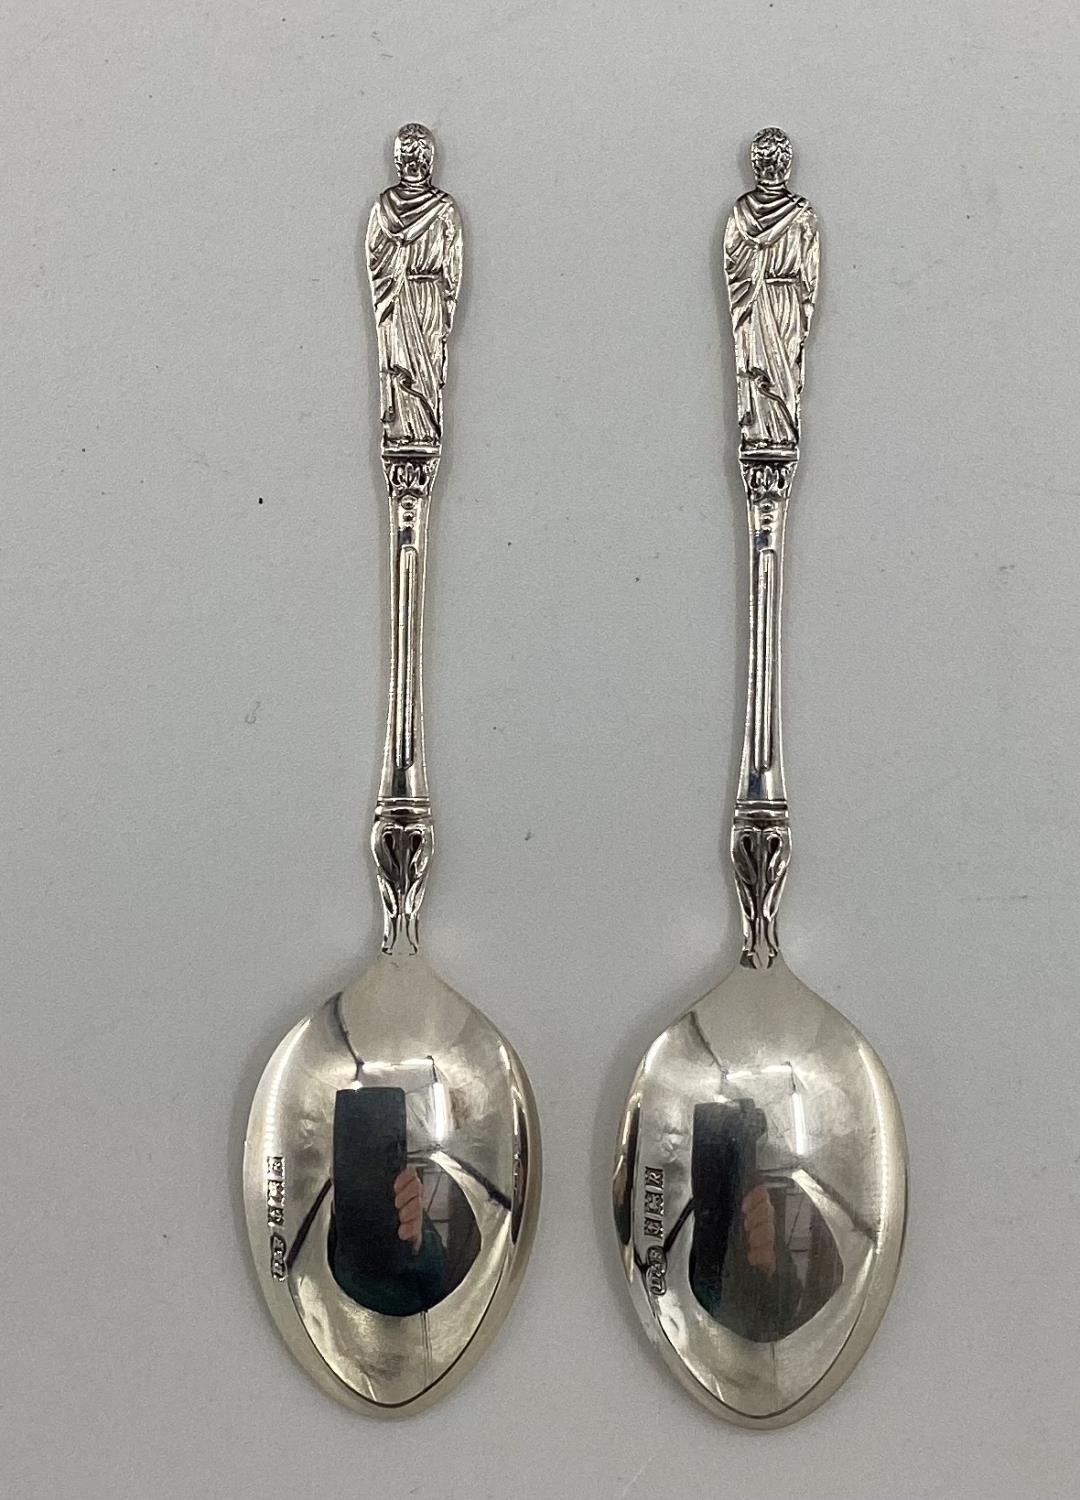 A boxed set of 6 sterling silver tea spoons with apostle finials by Deakin & Francis, Birmingham - Image 3 of 5